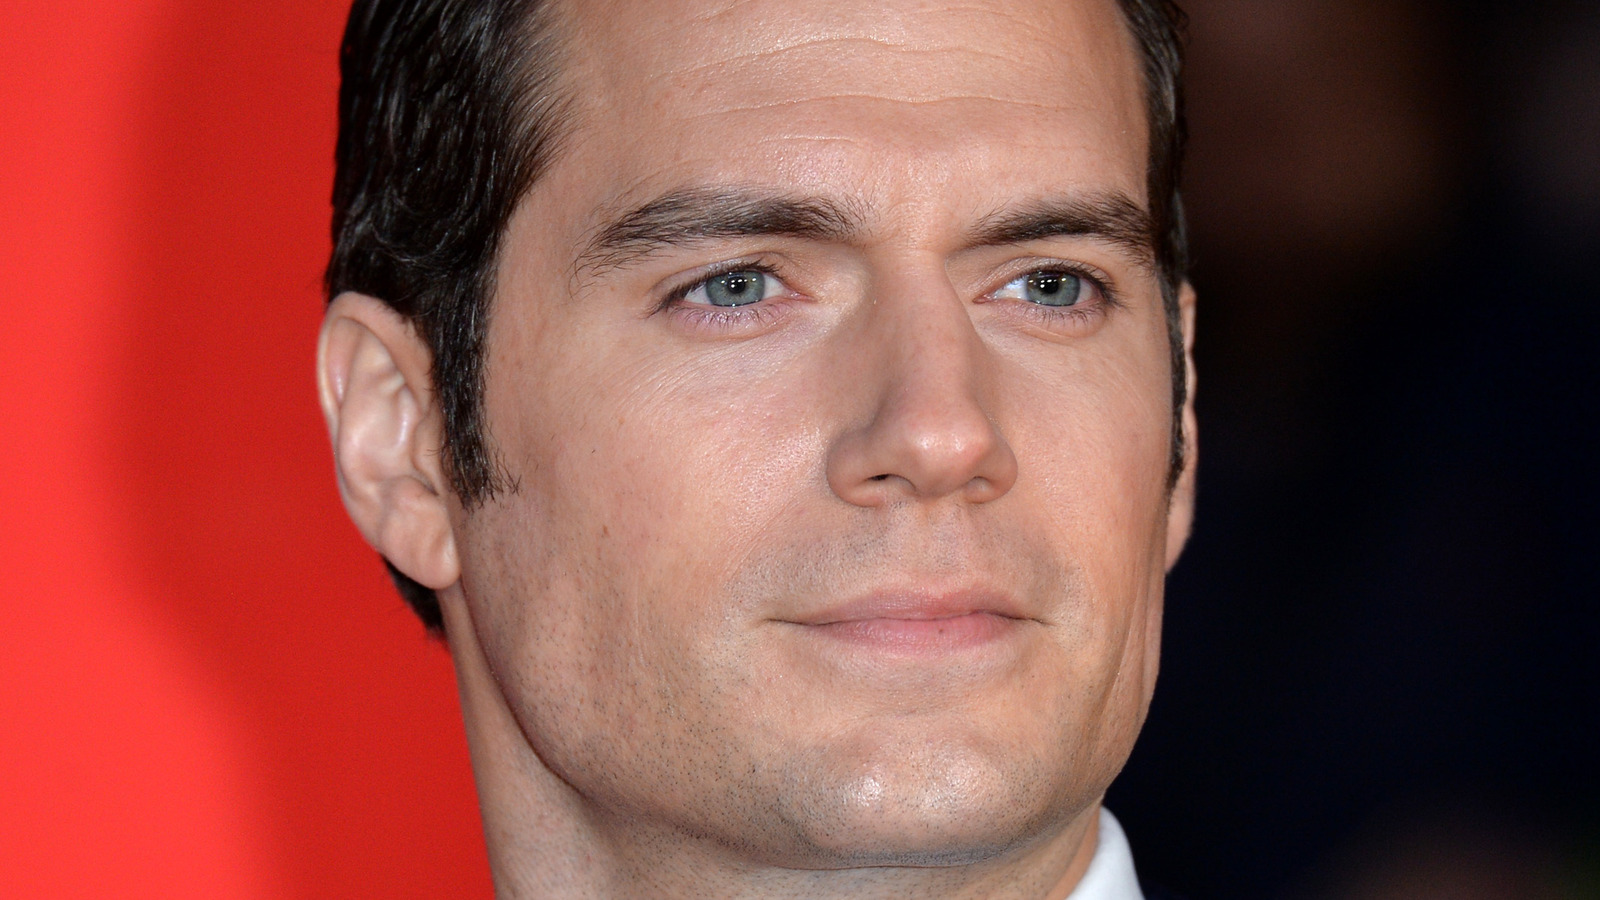 Report: Henry Cavill out as Superman - Polygon